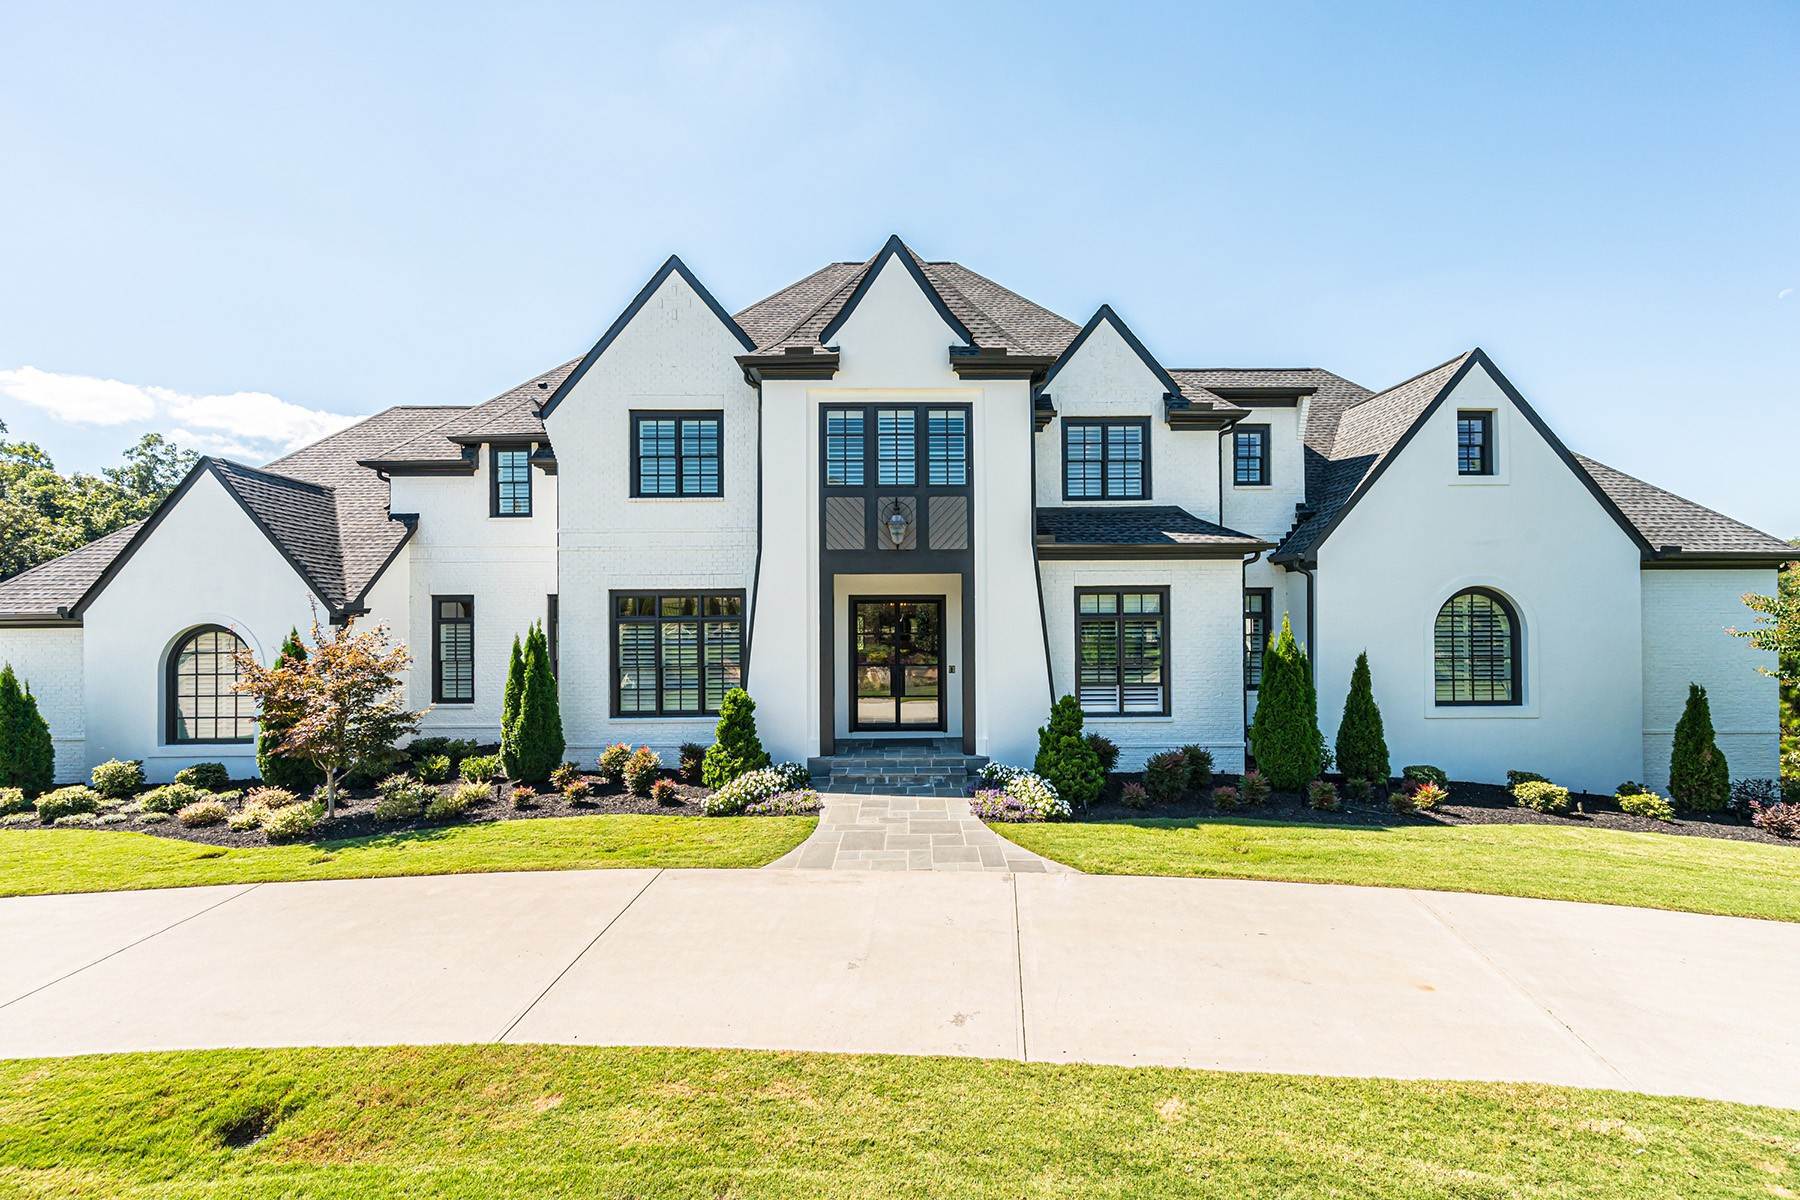 Single Family Homes for Sale at Extraordinary Private Gated Estate On Secluded Acreage 16170 Belford Drive Milton, Georgia 30004 United States